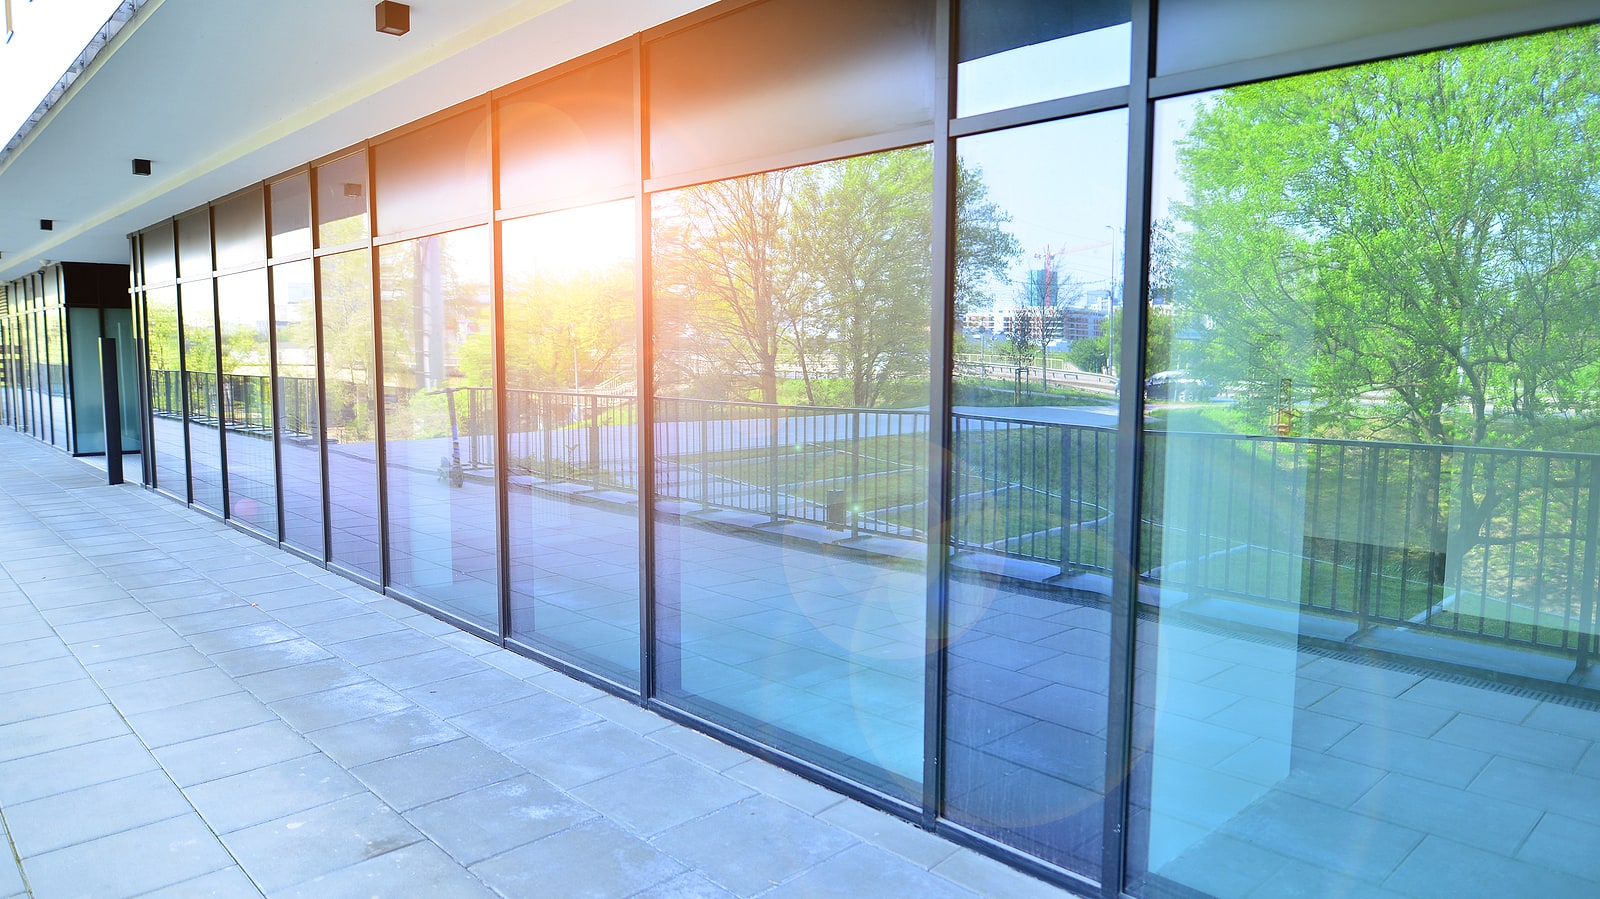 Commercial glass for offices and storefronts